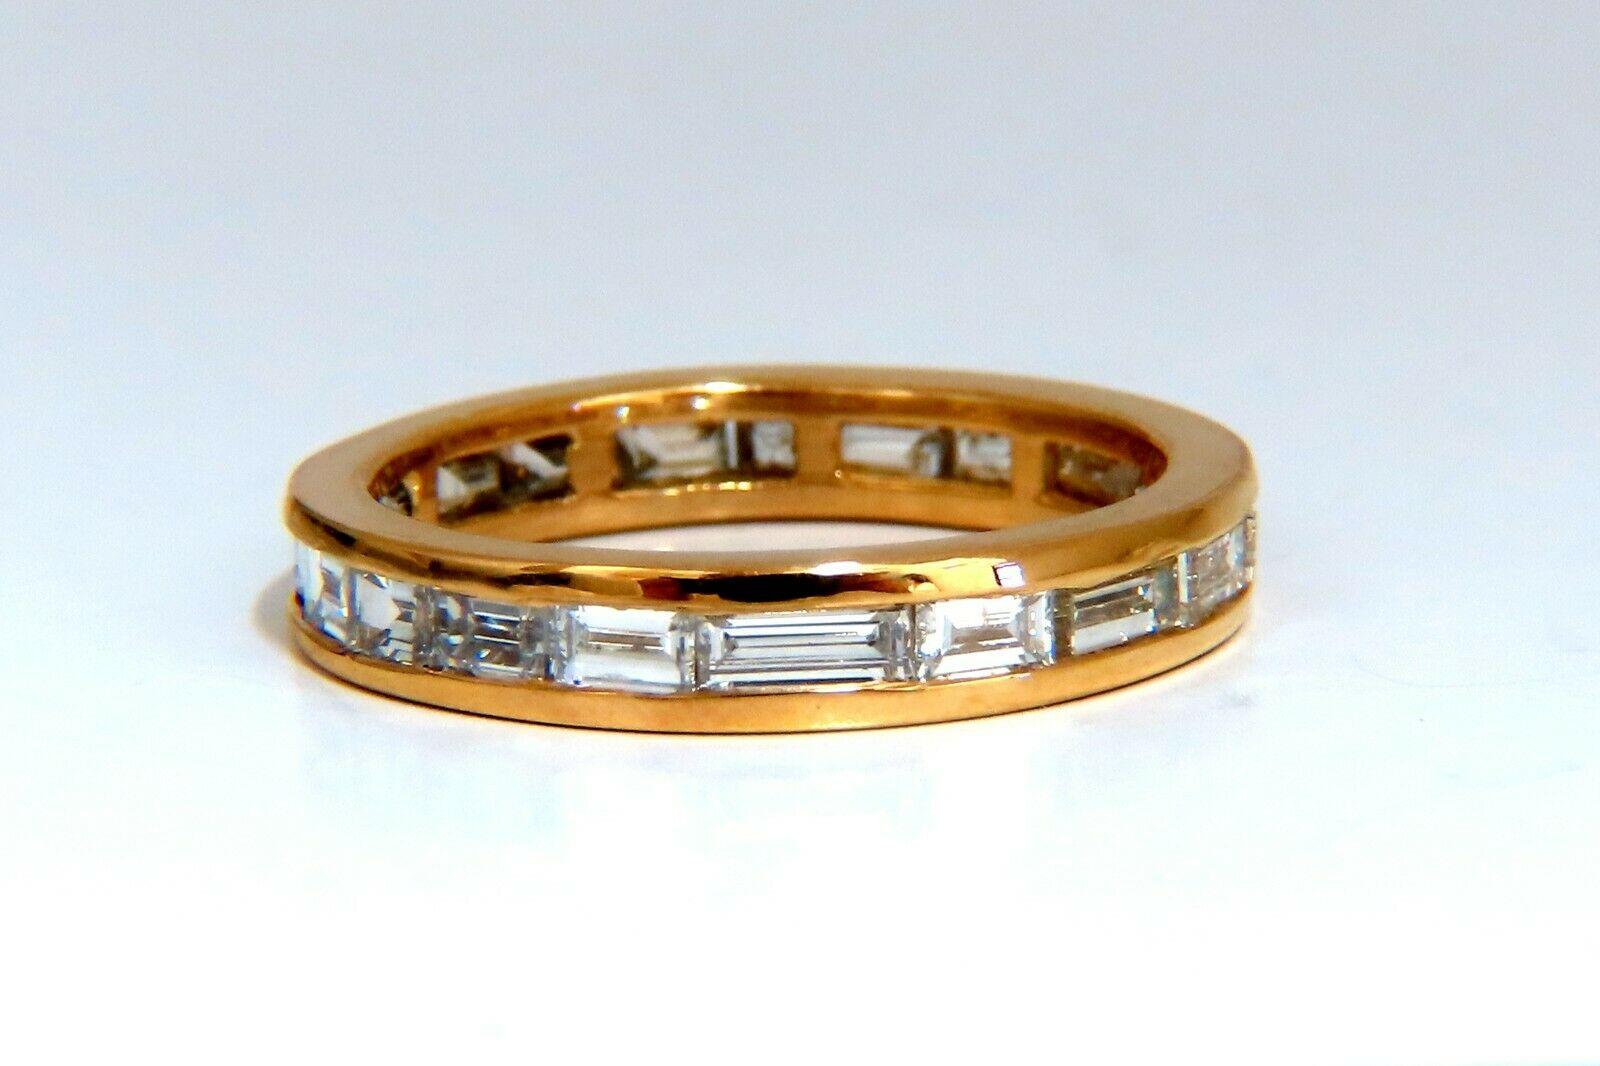 2.20ct Natural diamonds eternity baguette ring. G-color Vs-2 clarity.

Ring: 3.8mm wide

Depth 2.4mm

14kt. Yellow gold.

3.8 Grams

size 8.5

$8000 Appraisal Certificate to accompany. Resizing Service is not available.